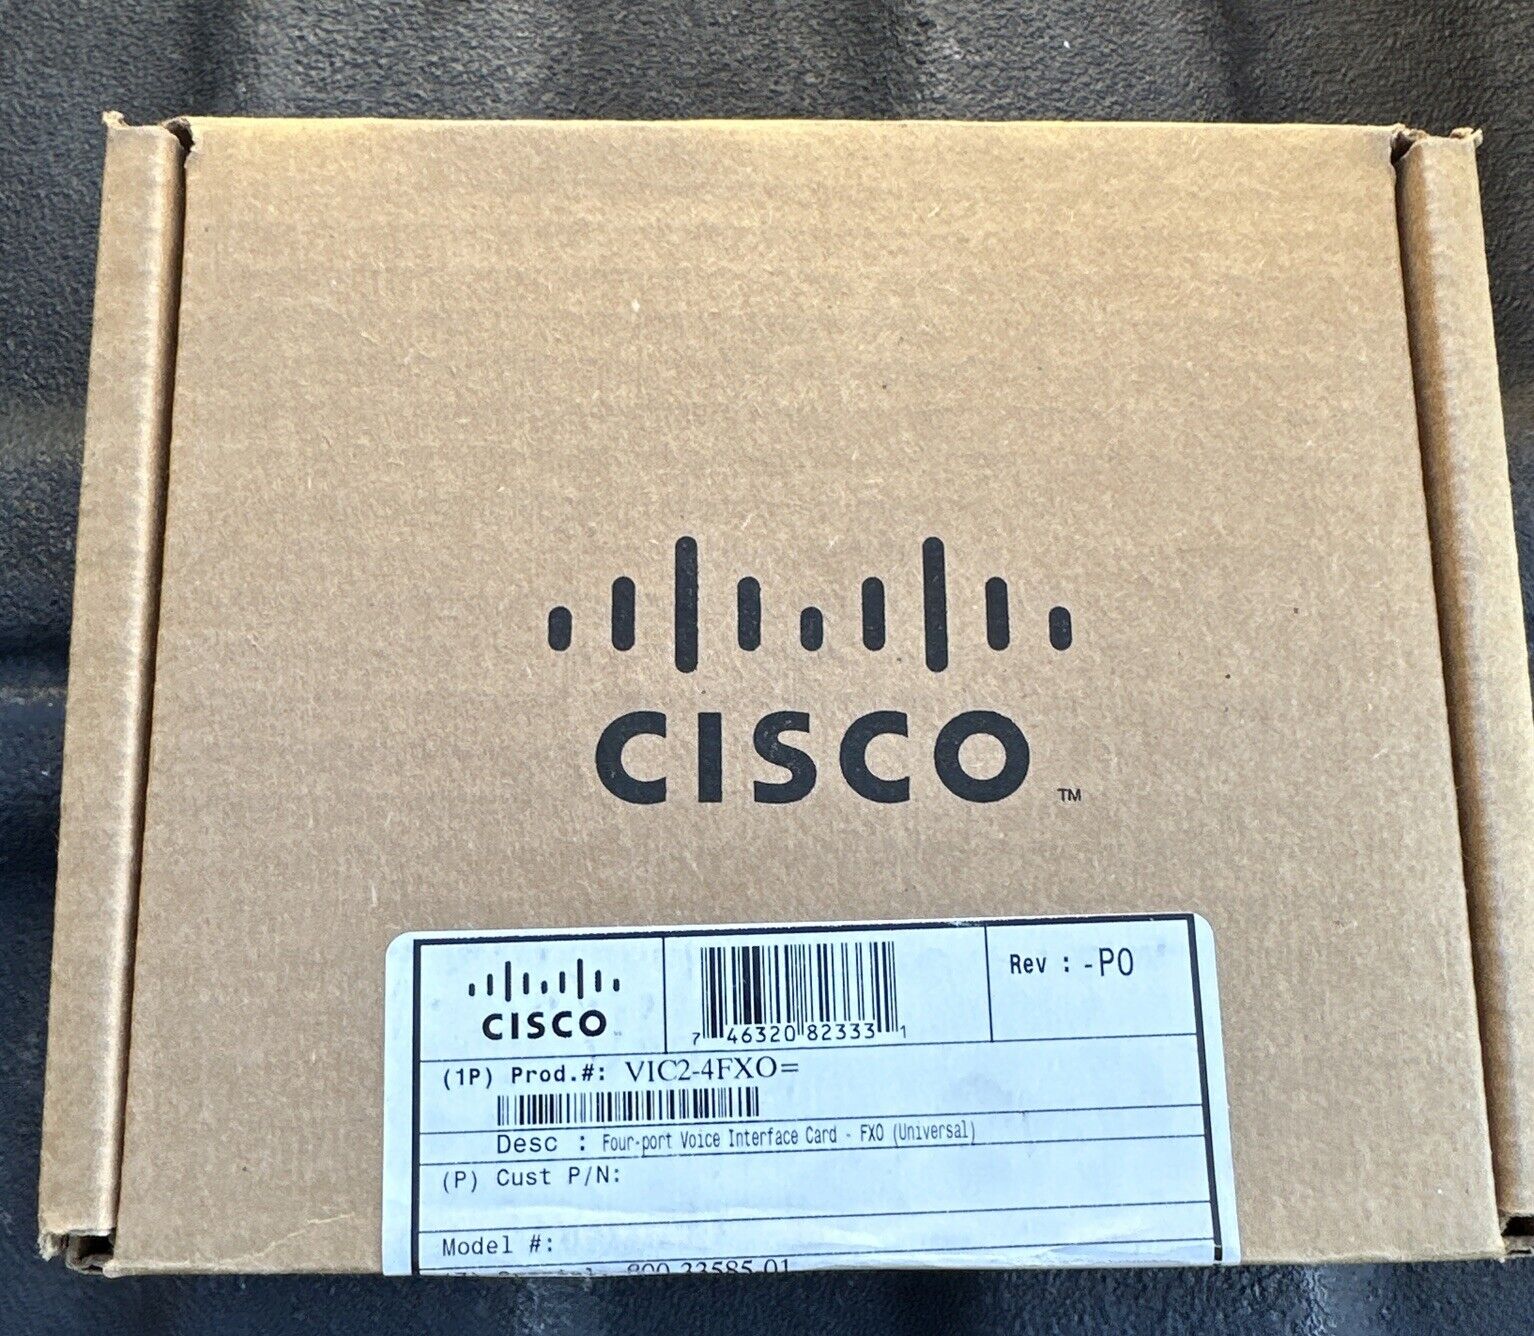 CISCO PART# VIC2-4FXO= 4 PORT VOICE INTERFACE CARD NEW IN BOX FXO UNIVERSAL